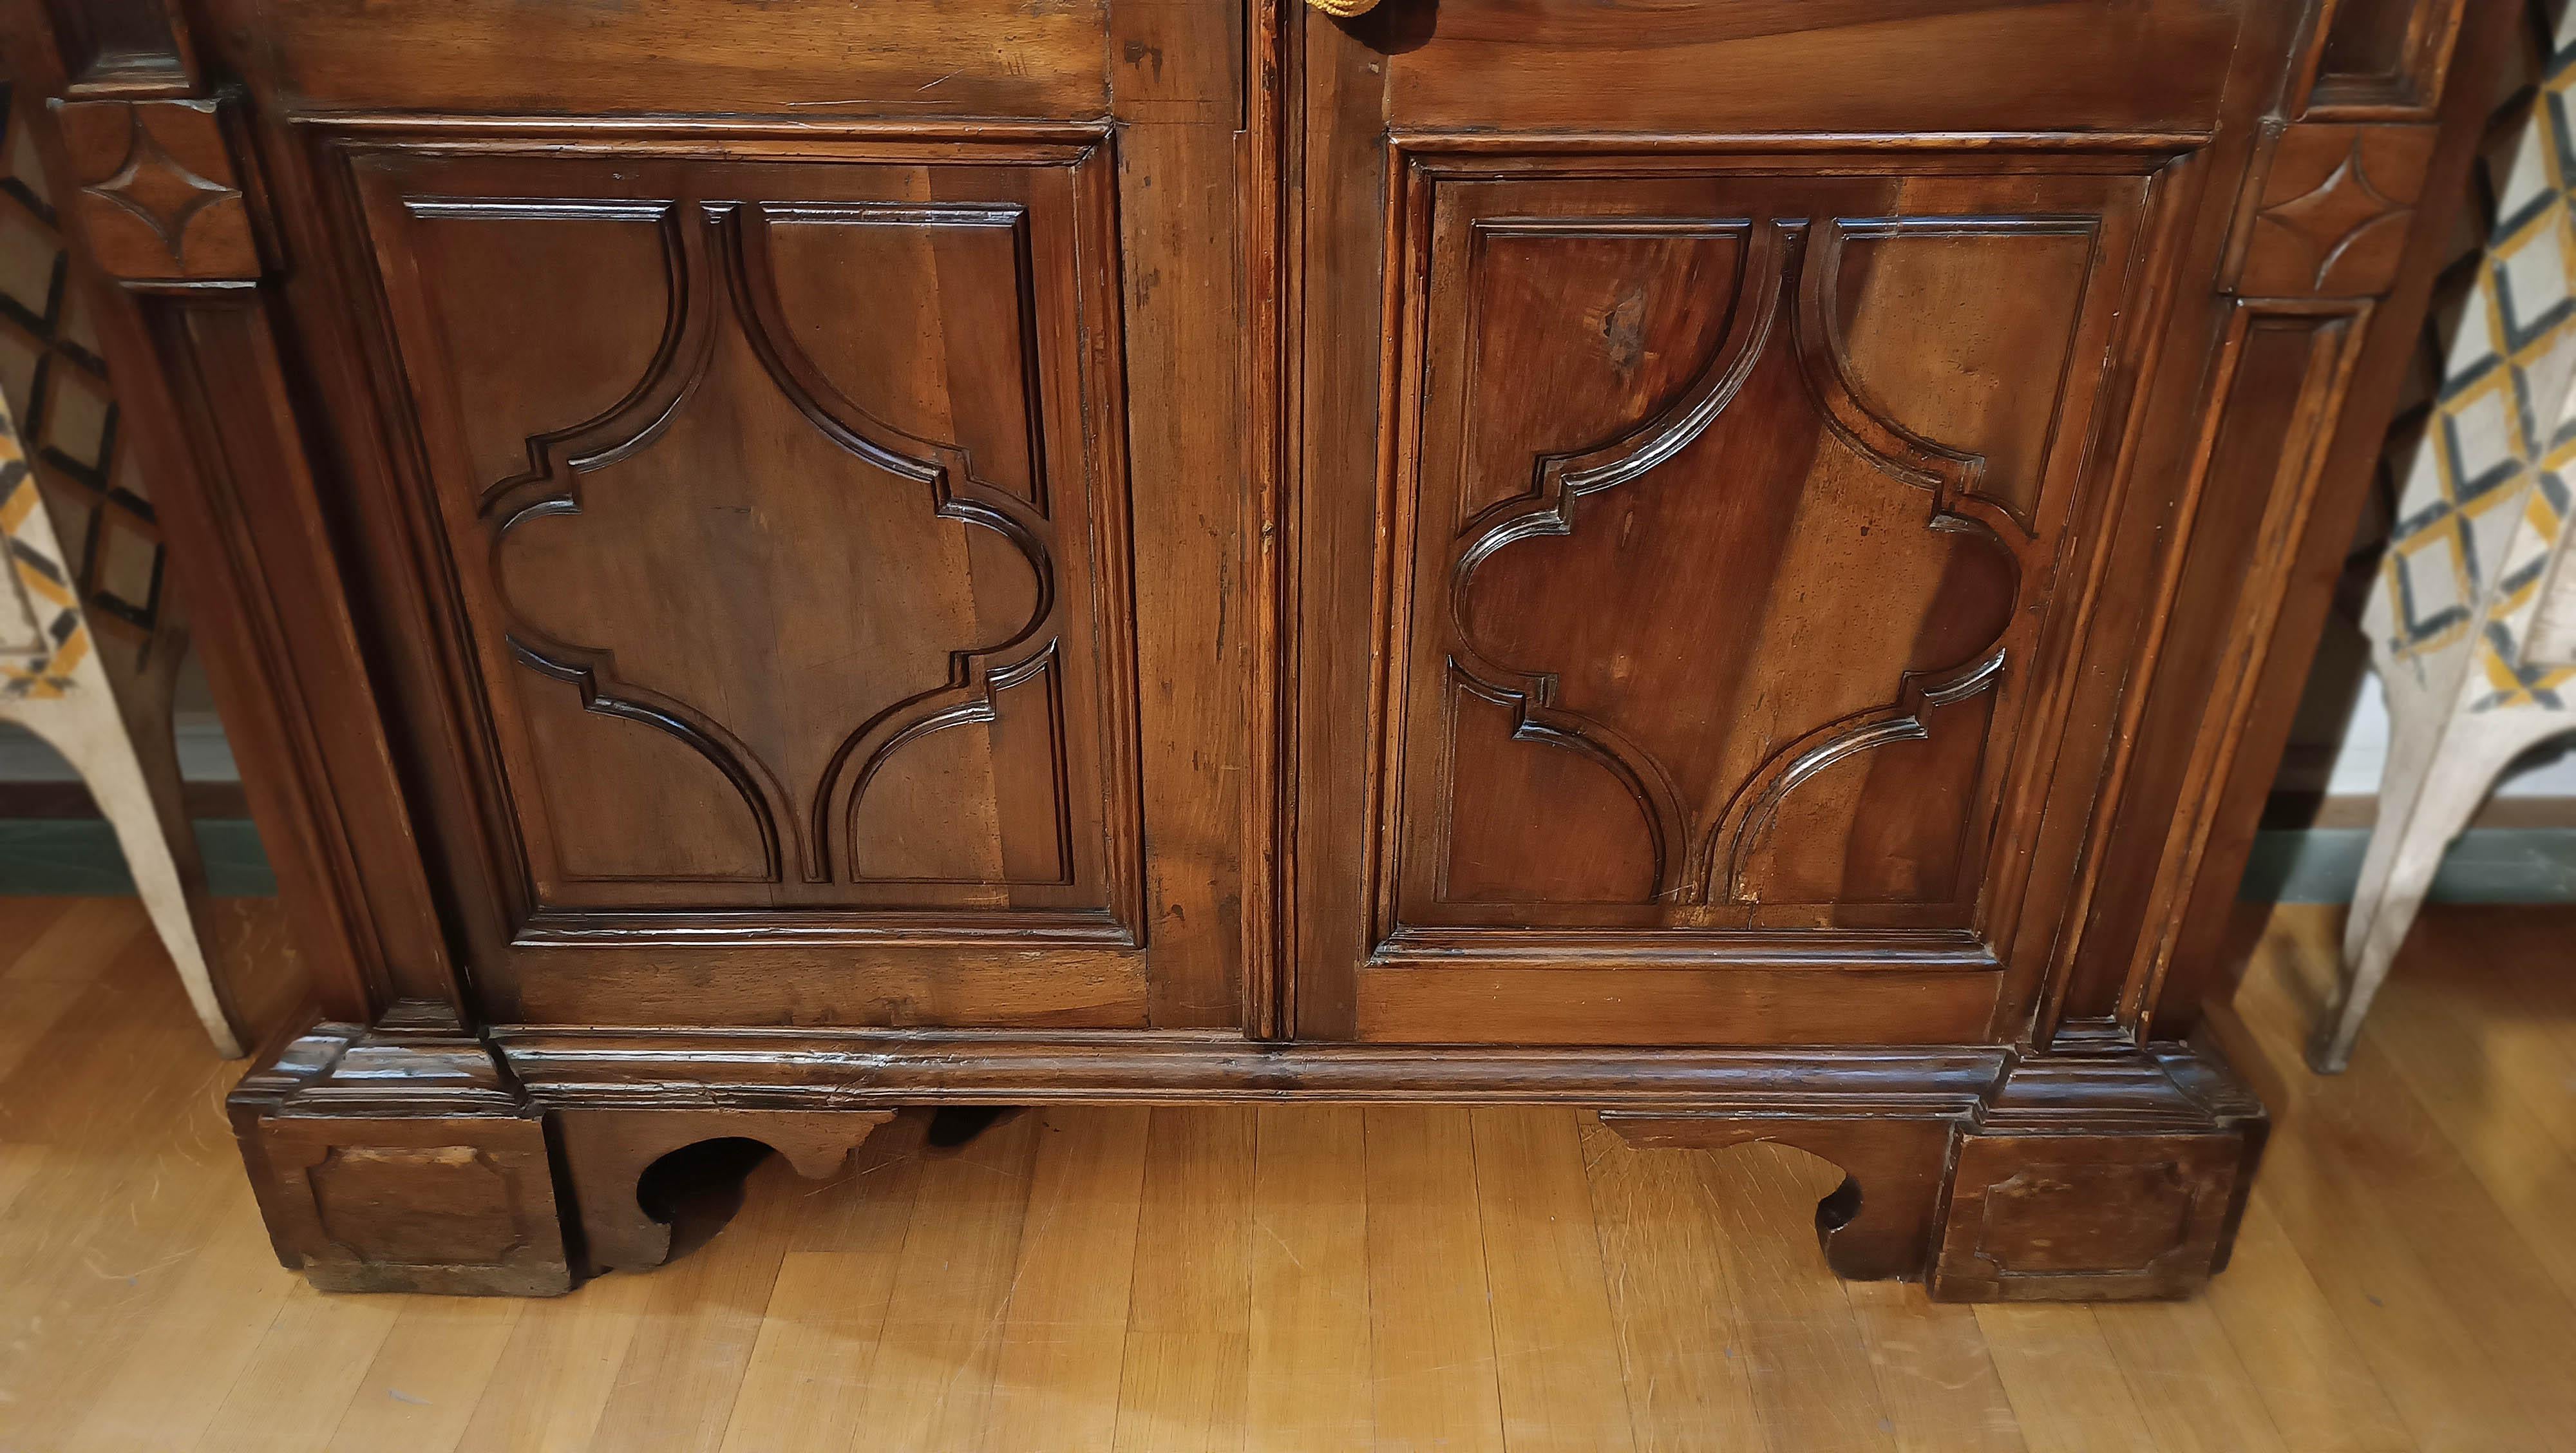 END OF THE 17th CENTURY LOUIS XIV WARDROBE IN SOLID WALNUT For Sale 3